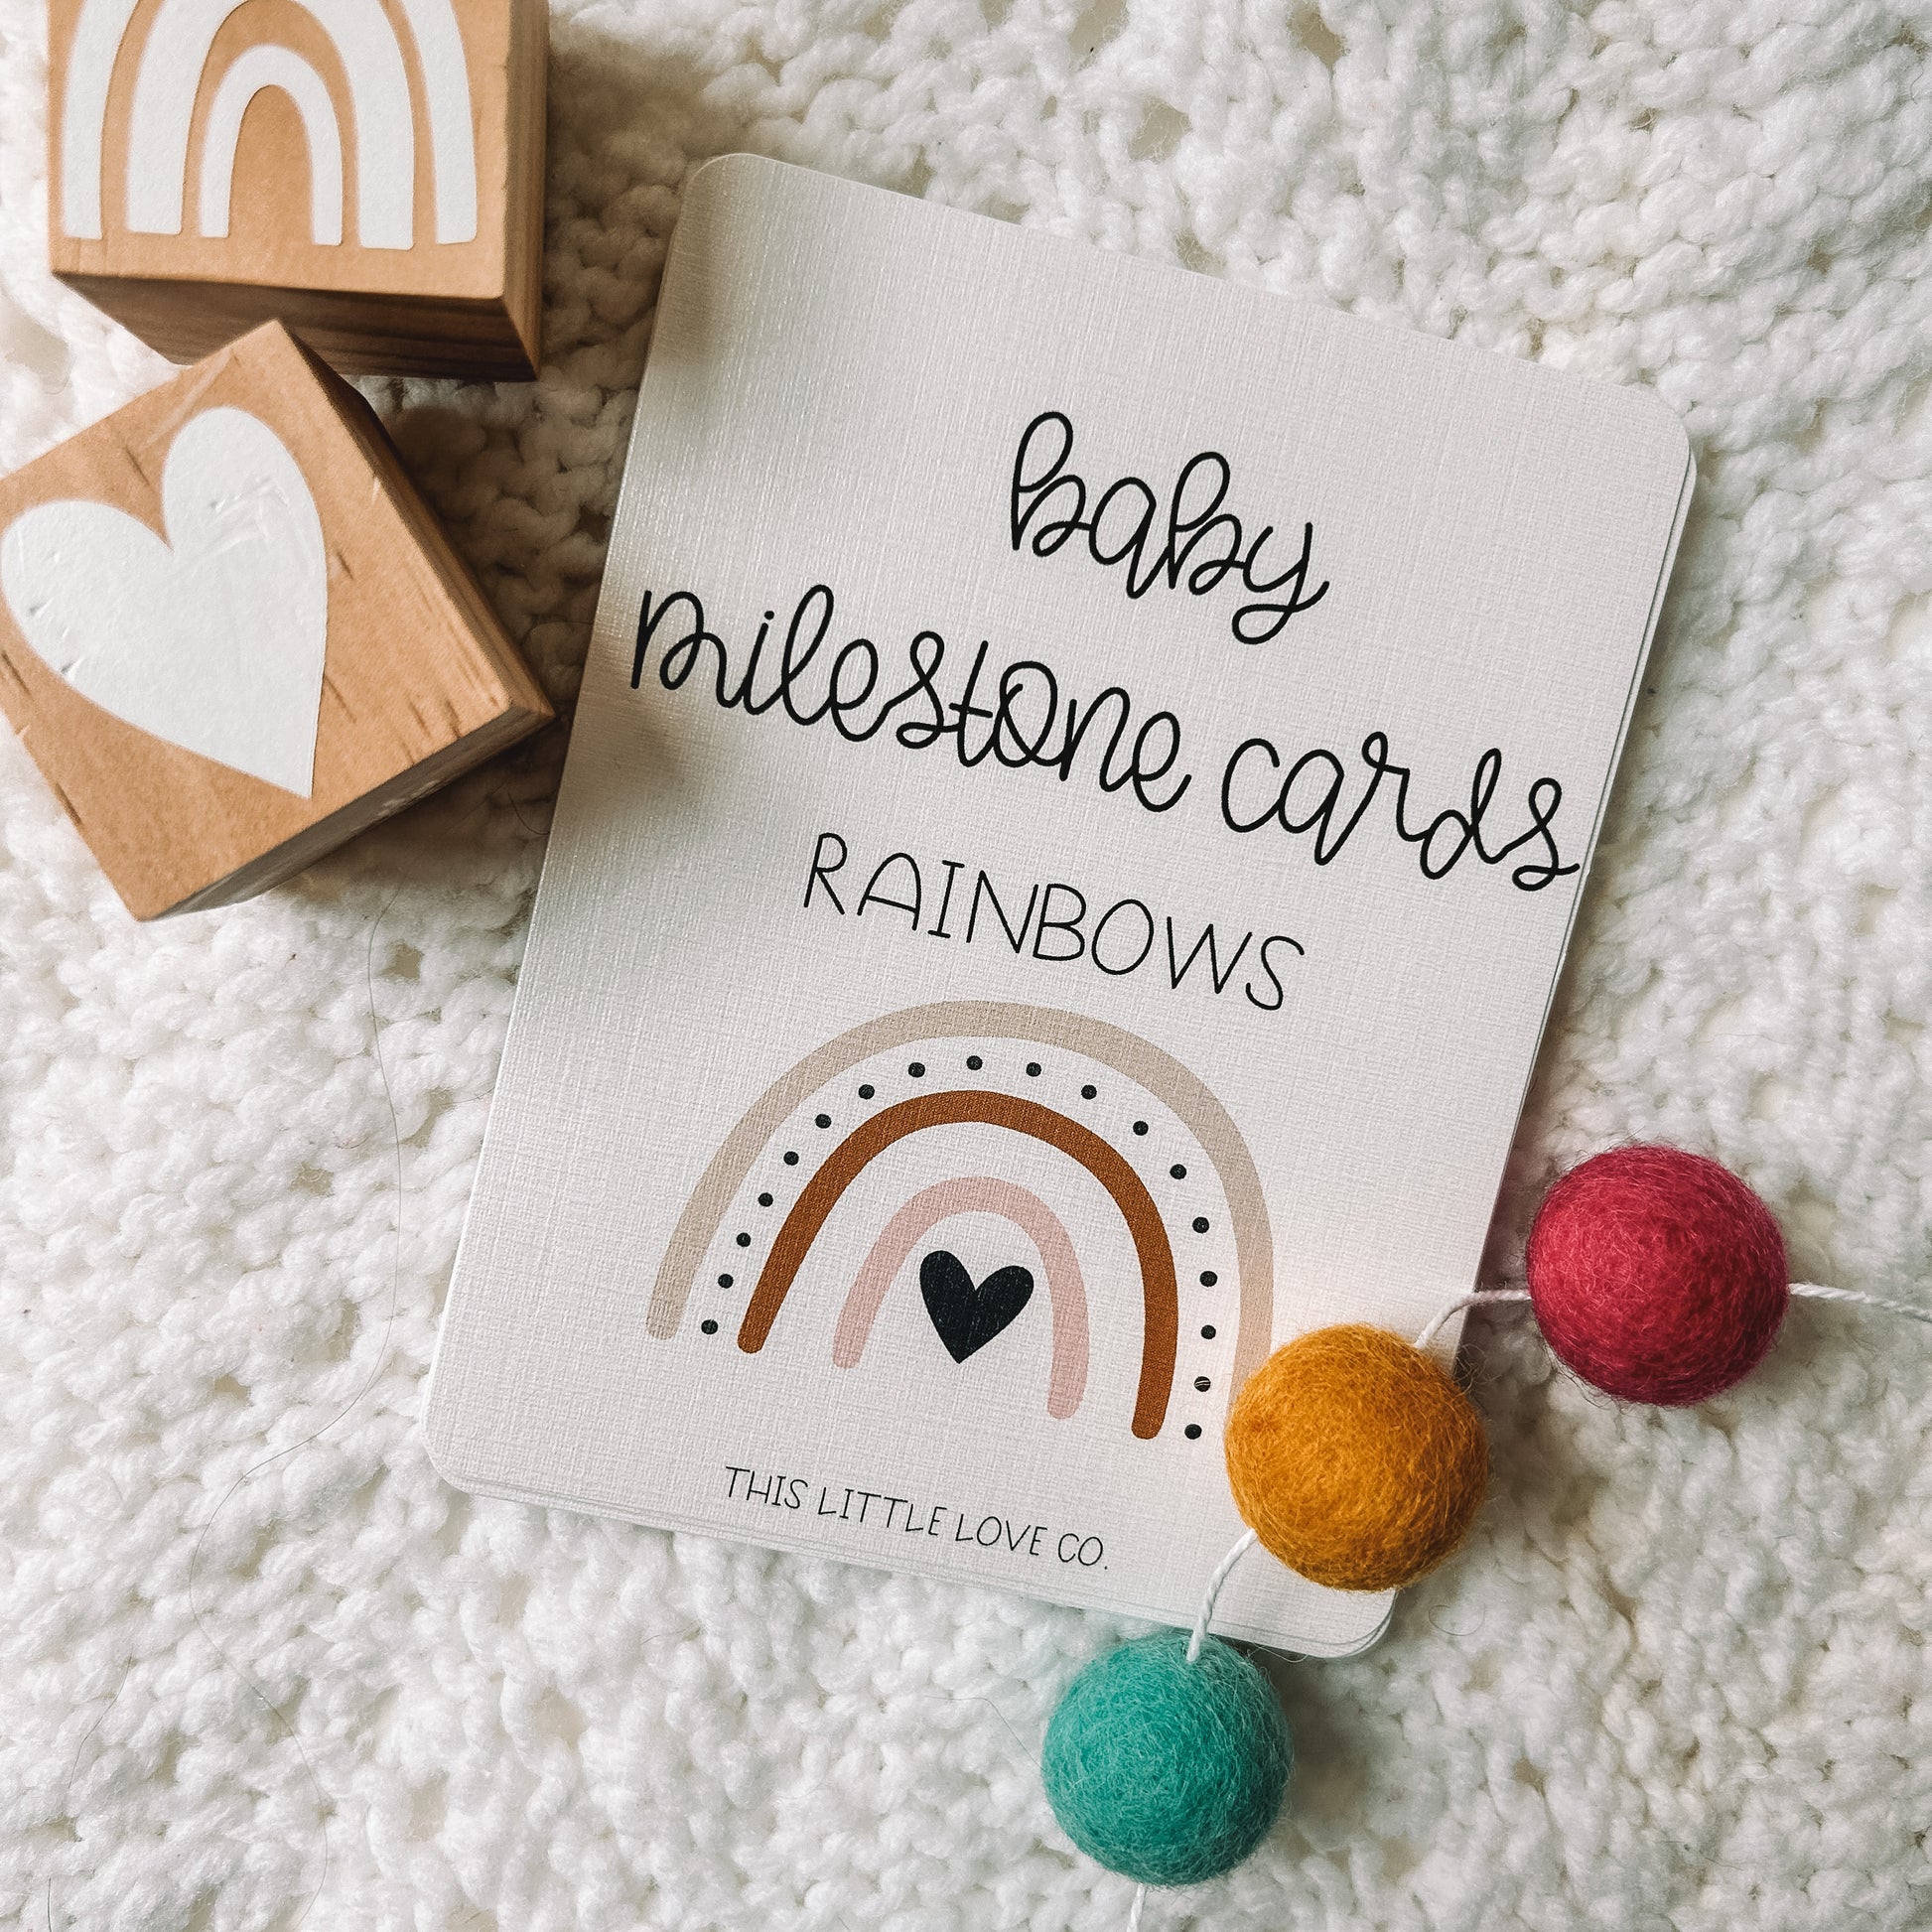 cover card that reads baby milestone cards rainbows with an image of a rainbow below. This Little Love Co is in small text at the bottom of the card